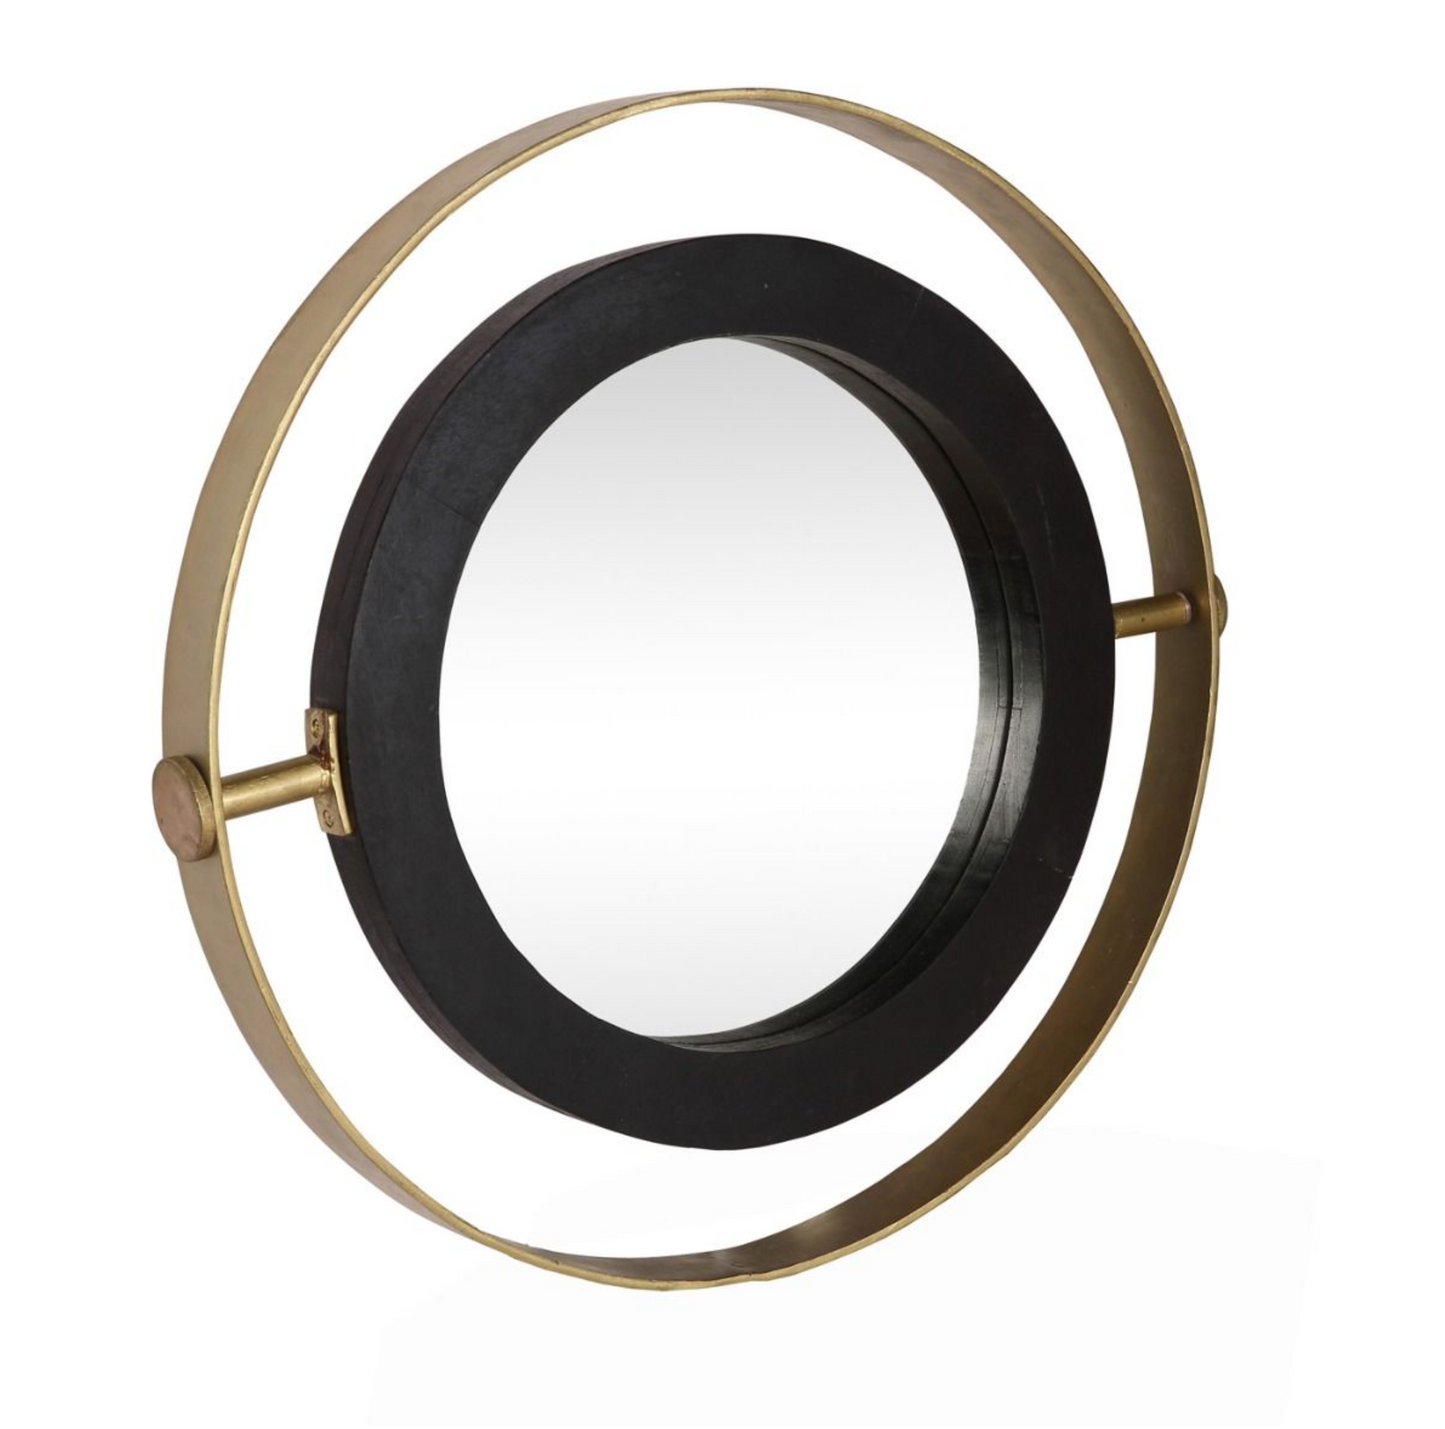 Round Orion Mirror with Black Wood Frame